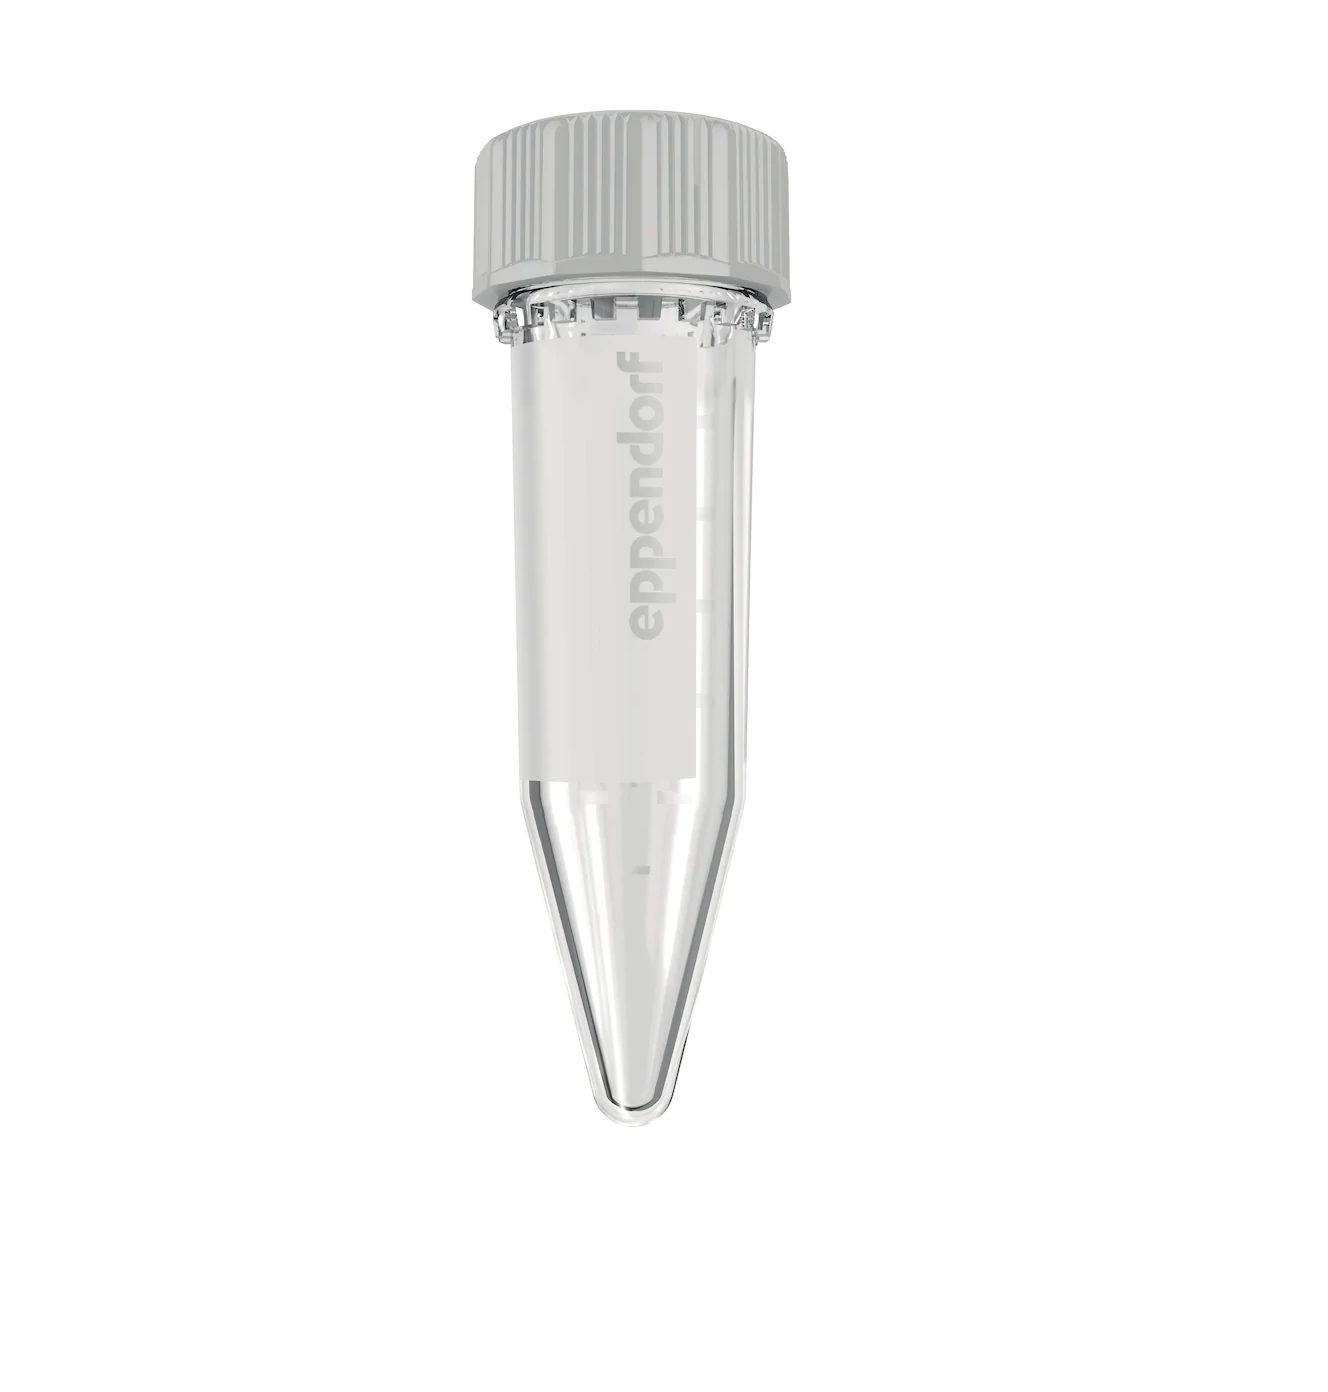 Eppendorf Tubes® 5.0 mL with screw cap, starter pack